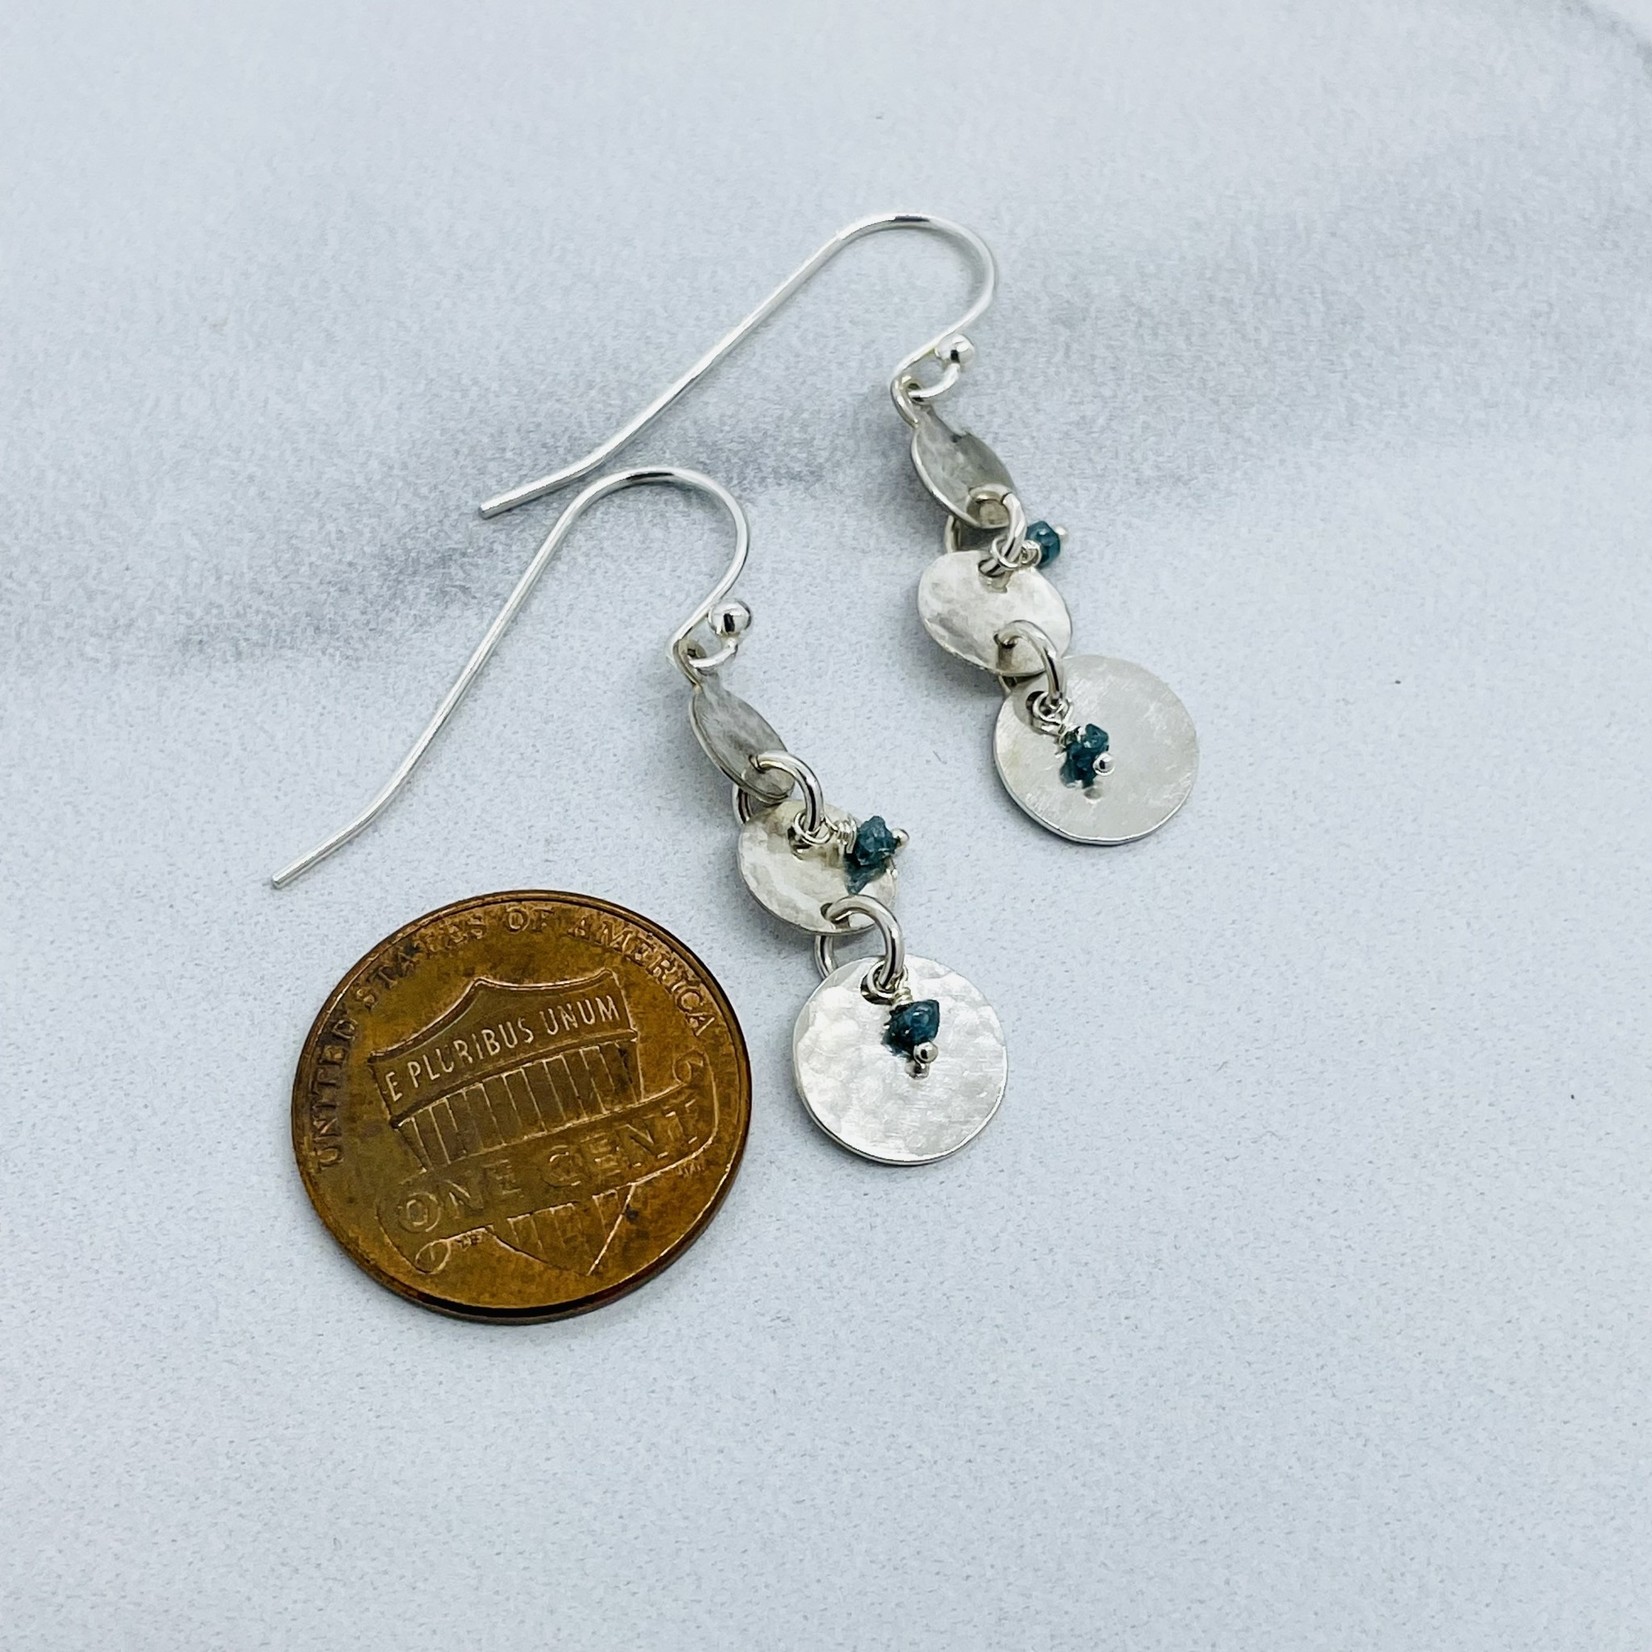 Handmade Earrings with 3 hammered discs, 2 blue diamonds